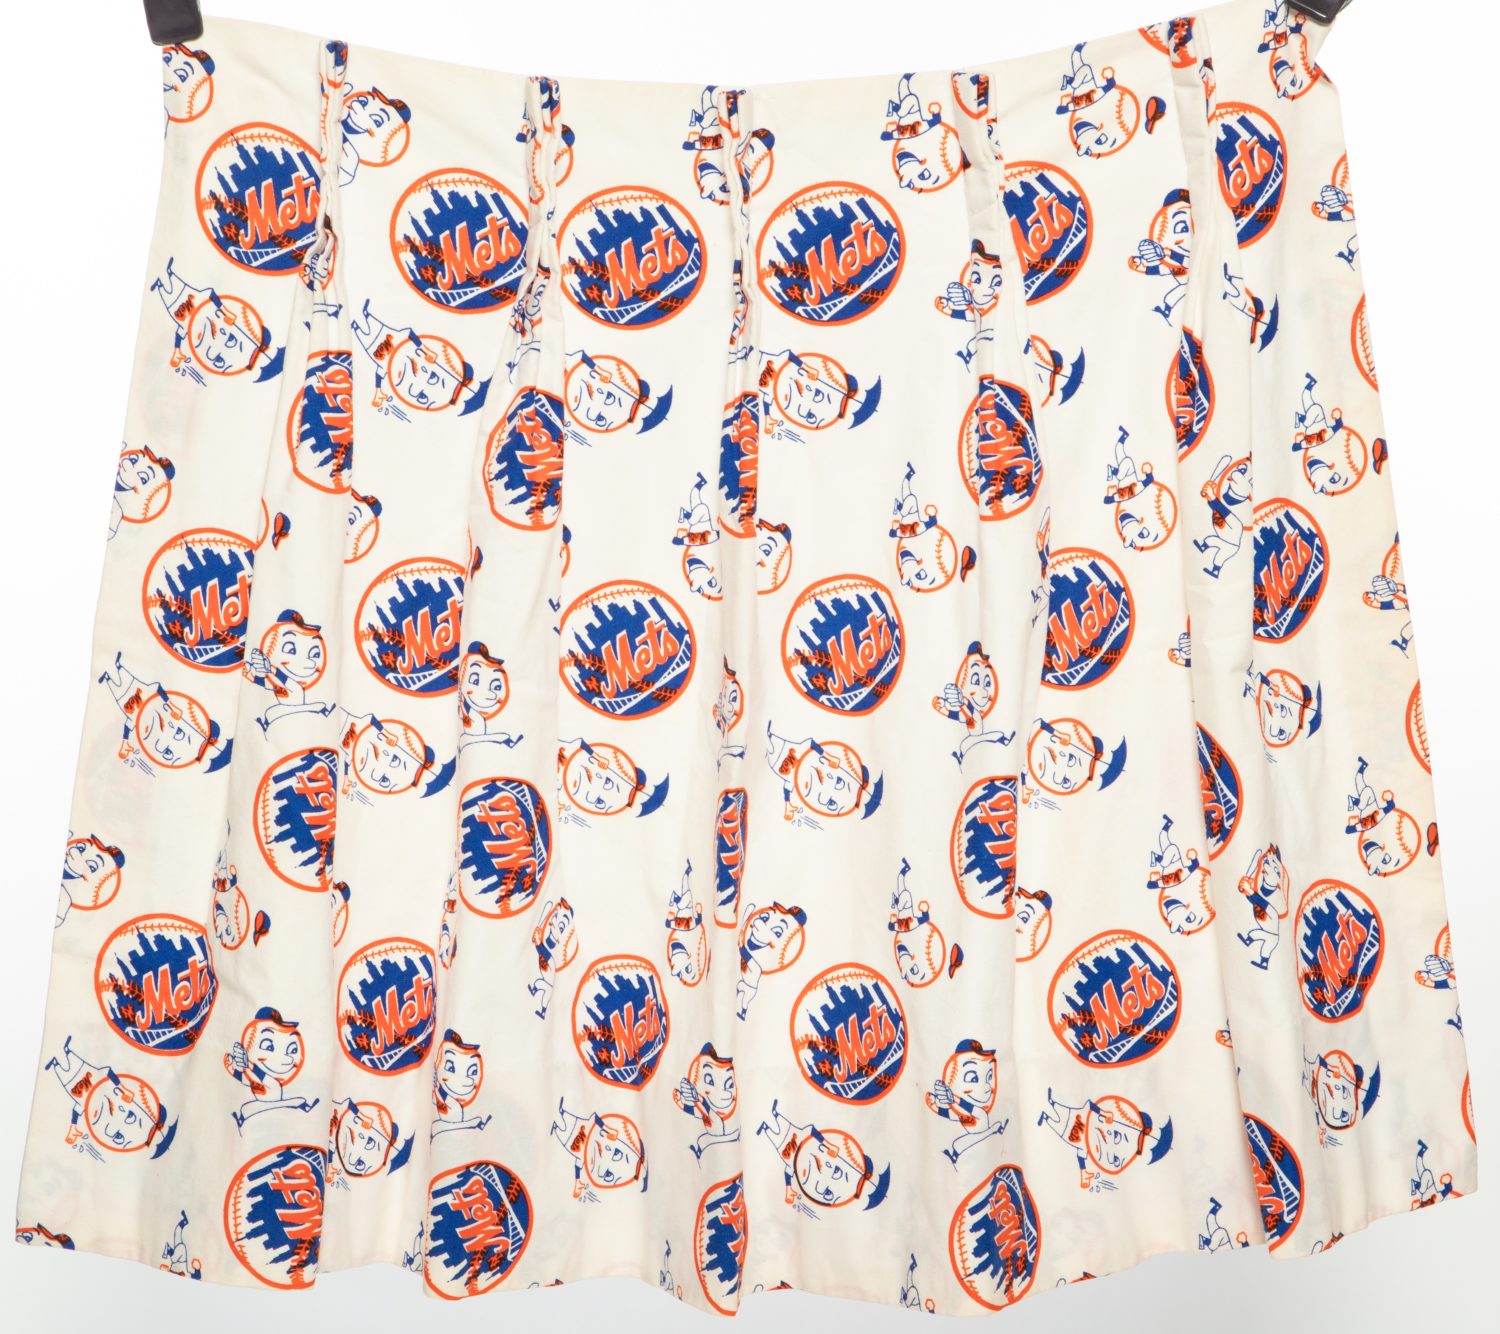 Mr. Met Curtains, Placemat and Napkin